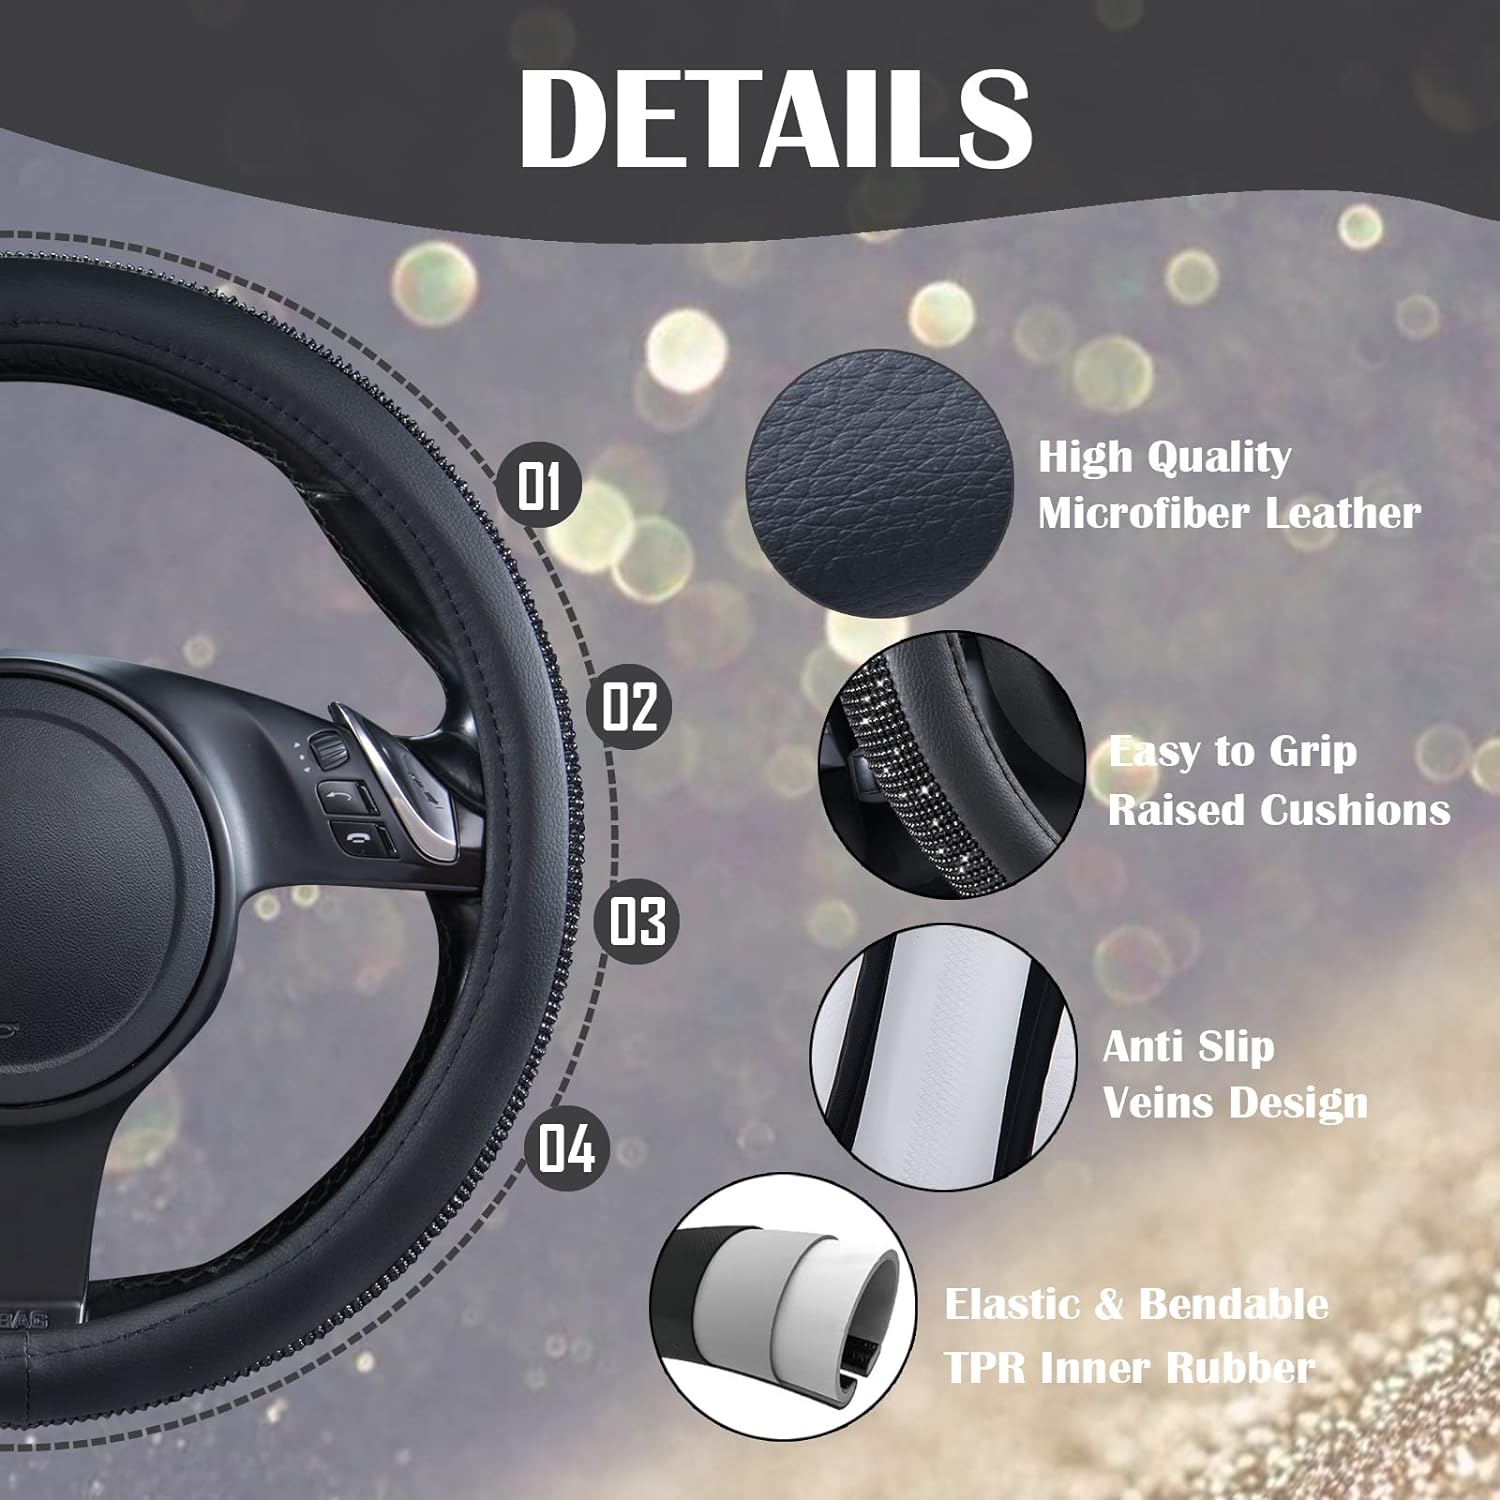 CAR PASS Diamond Leather Steering Wheel Cover & Iridescent Diamond &Nappa Calfskin Leather Cushioned,Bling seat Covers Fit for Auto SUV Sedan,Sparkly Glitter Shining Rhinestone